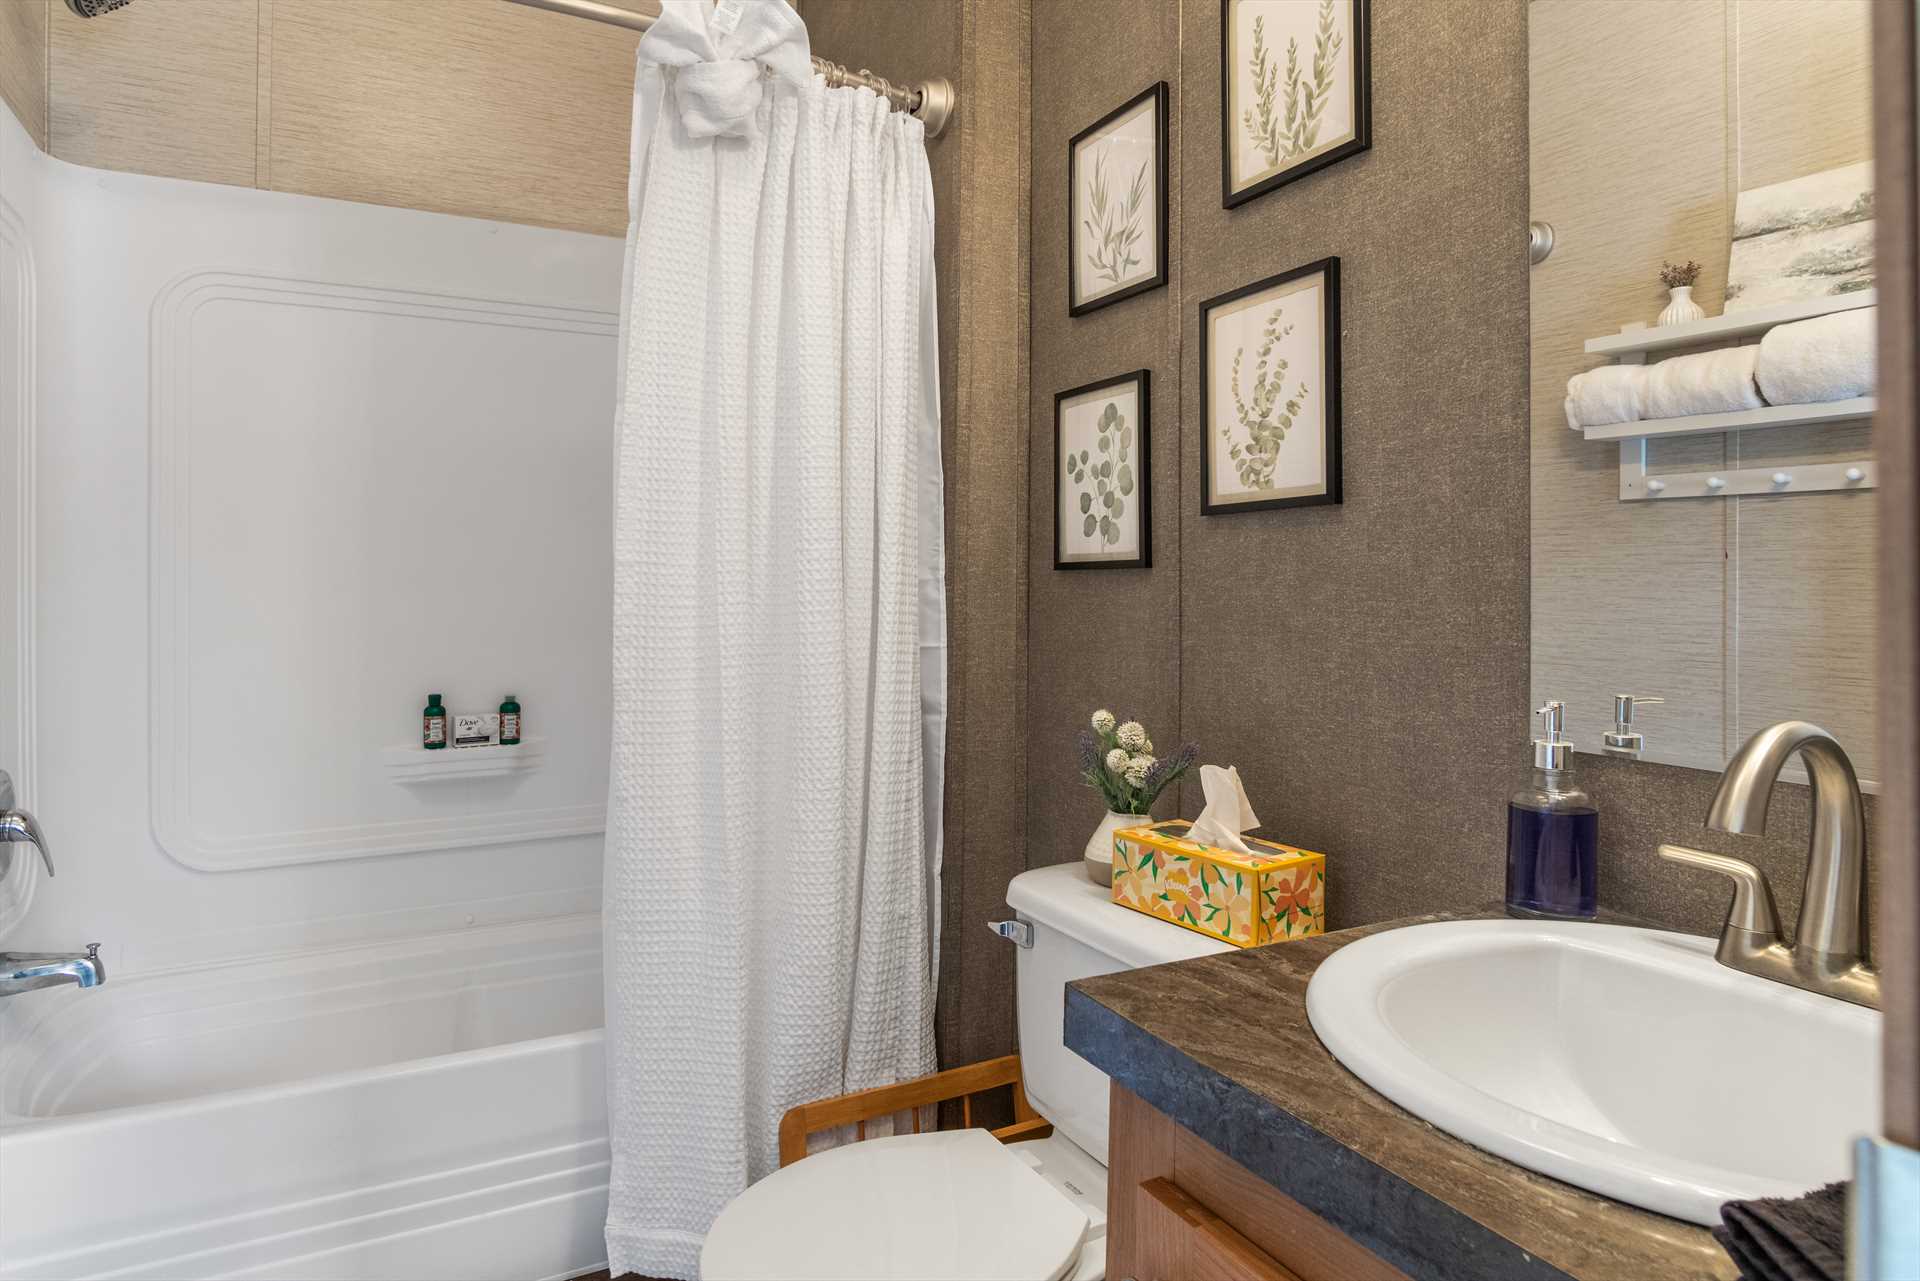                                                 The immaculately-clean full bath at Hill Country Memories includes a tub and shower combo, along with plenty of fresh linens.